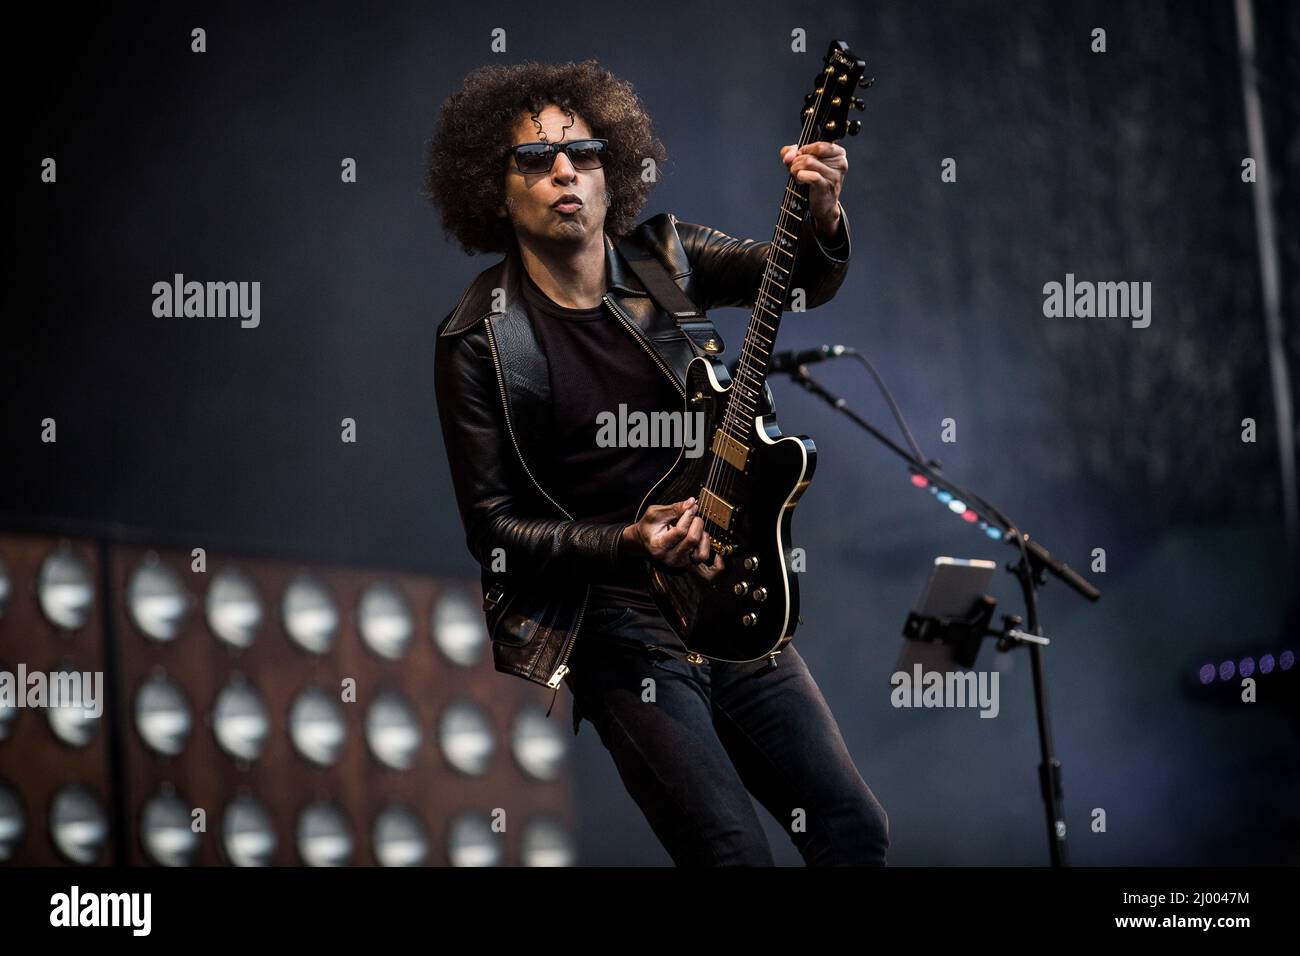 William DuVall of rock band Alice in Chains performing live at Tons of Rock festival in Norway in 2018 Stock Photo